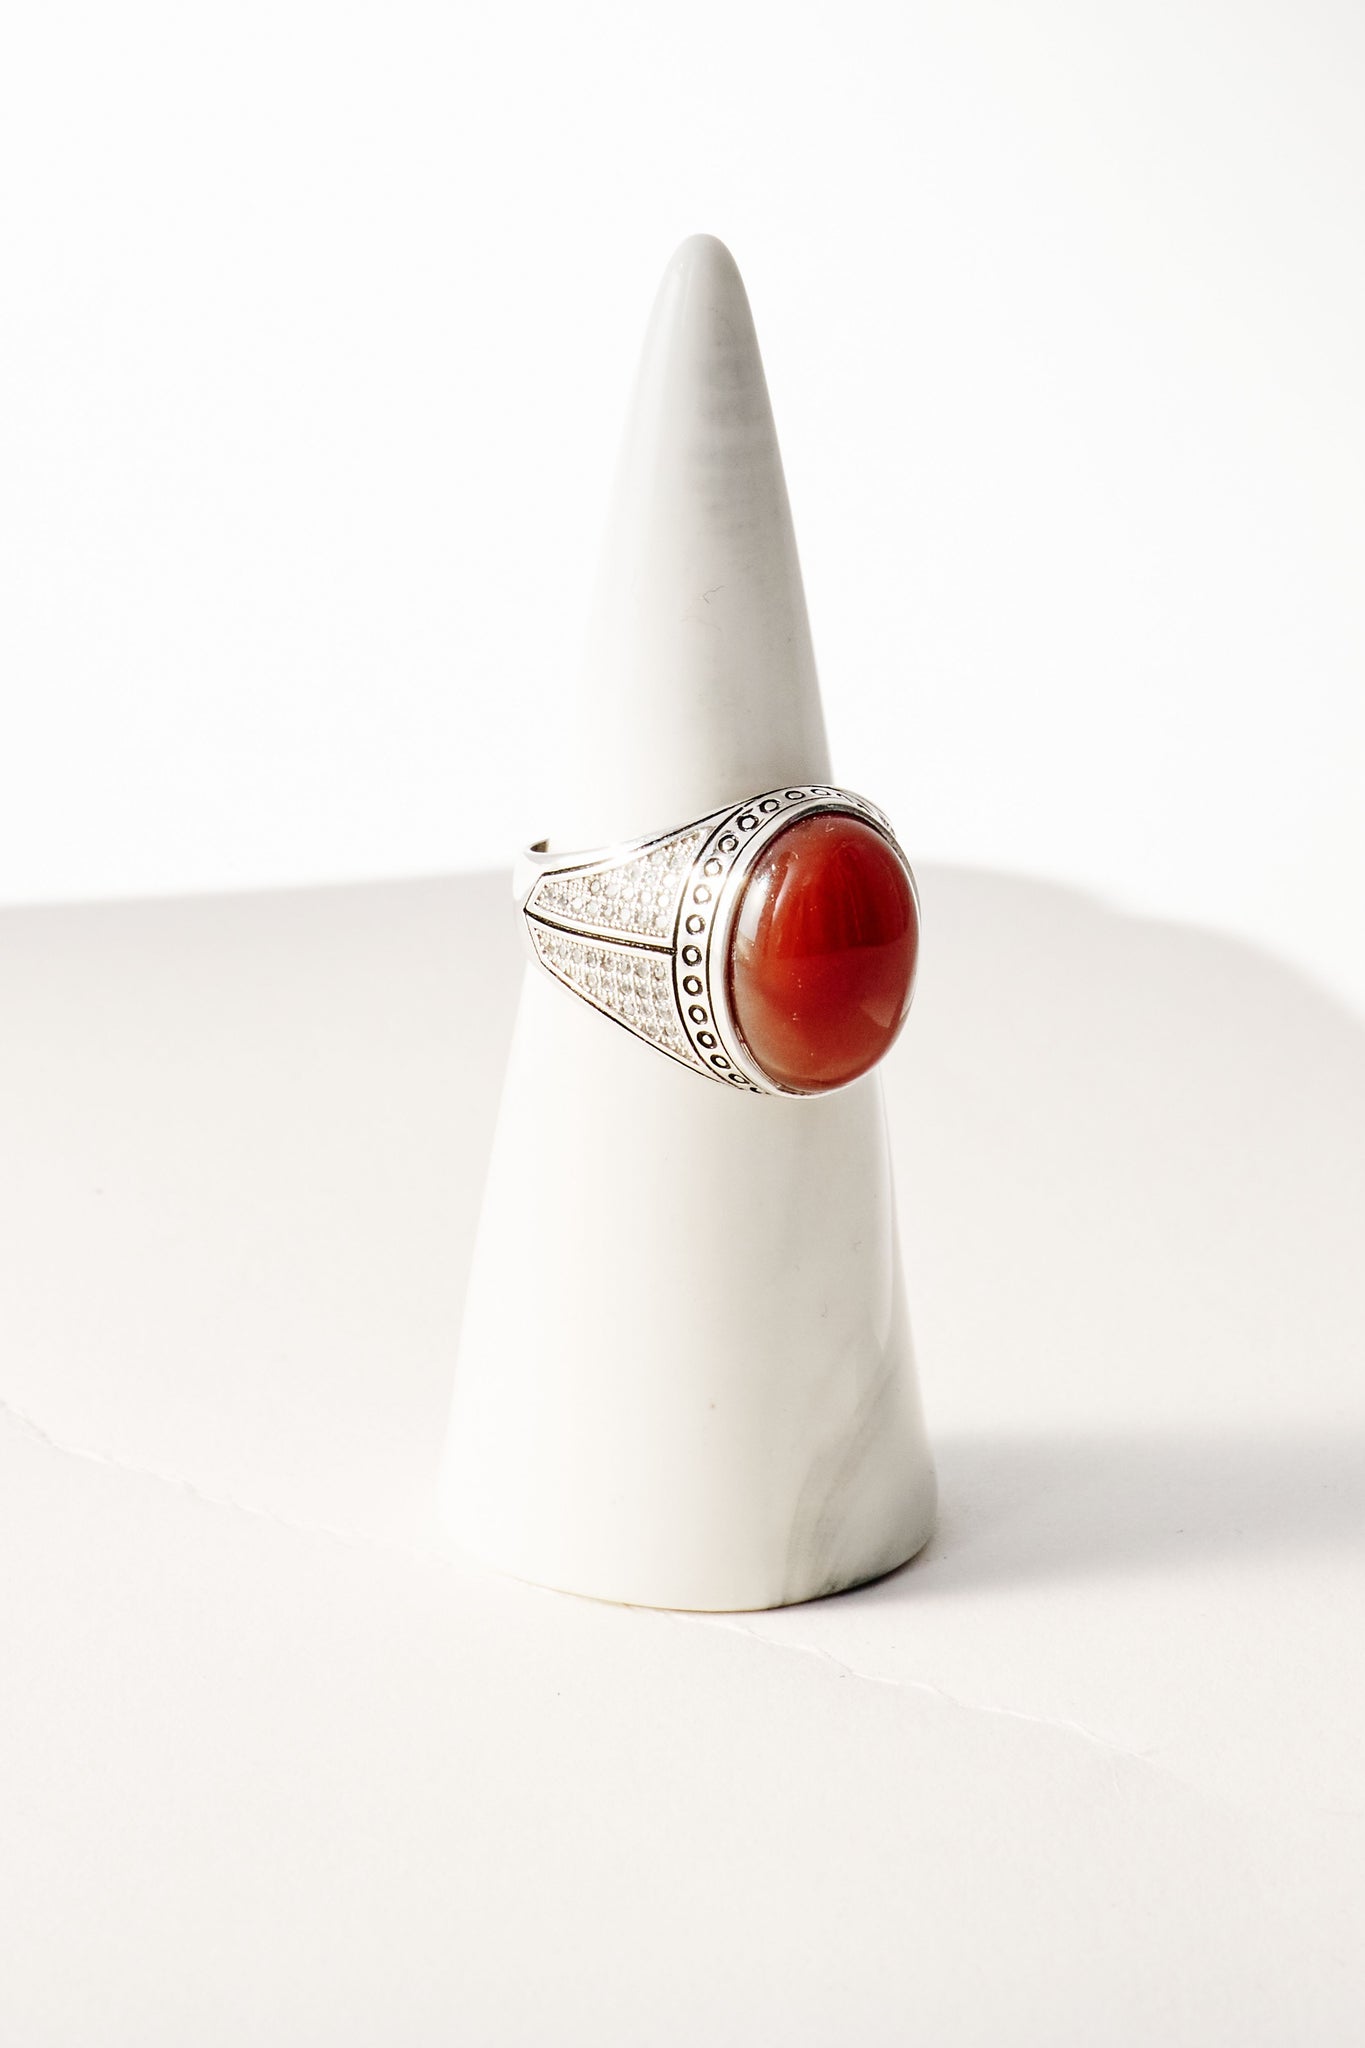 Vintage Sterling Silver Ring With Inset Agate